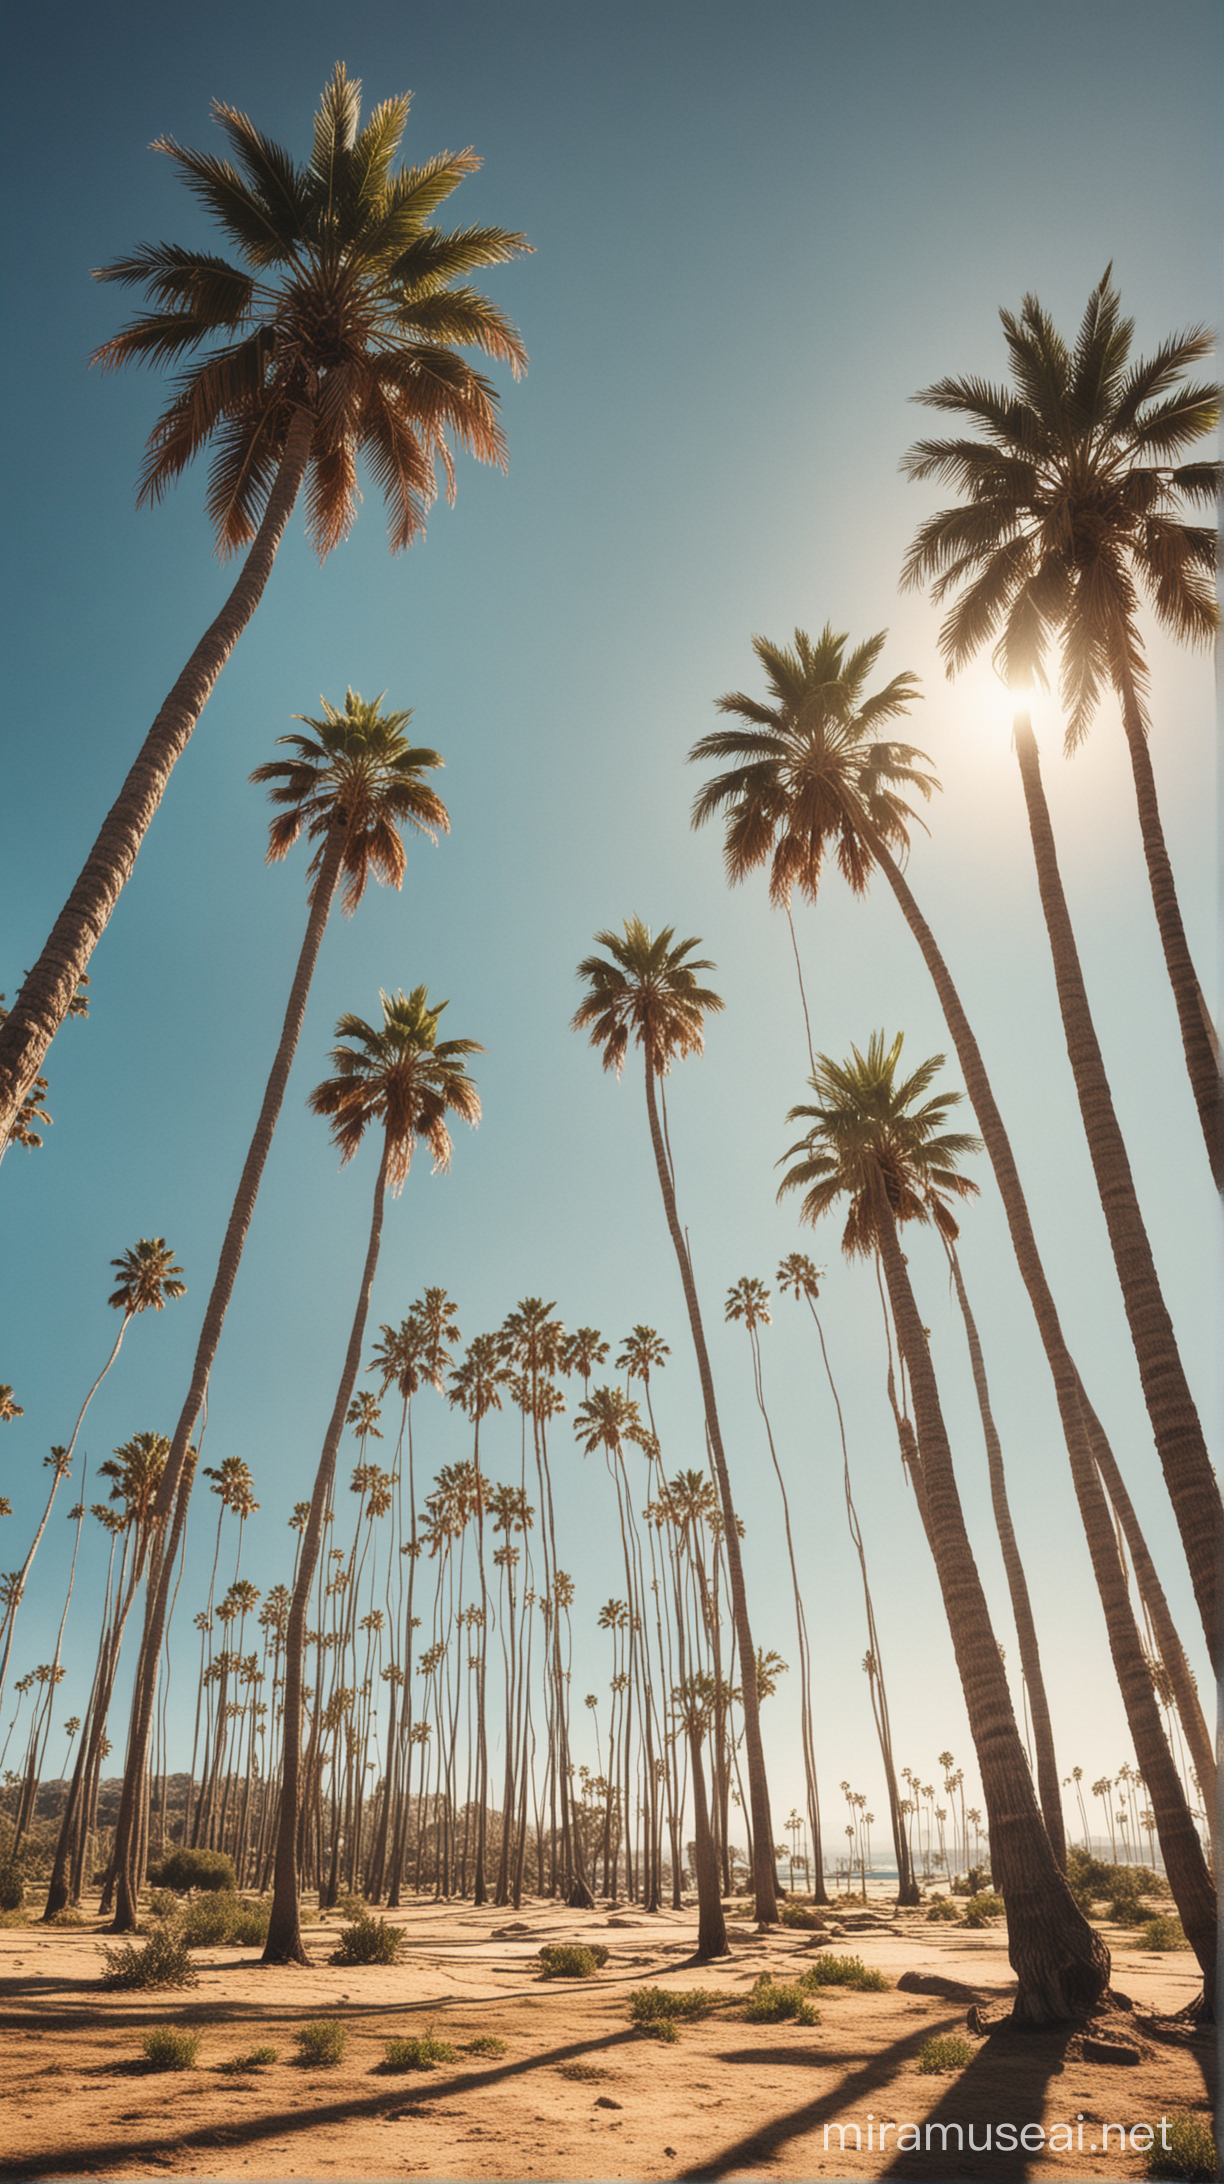 Sunny California Landscape with Palm Trees